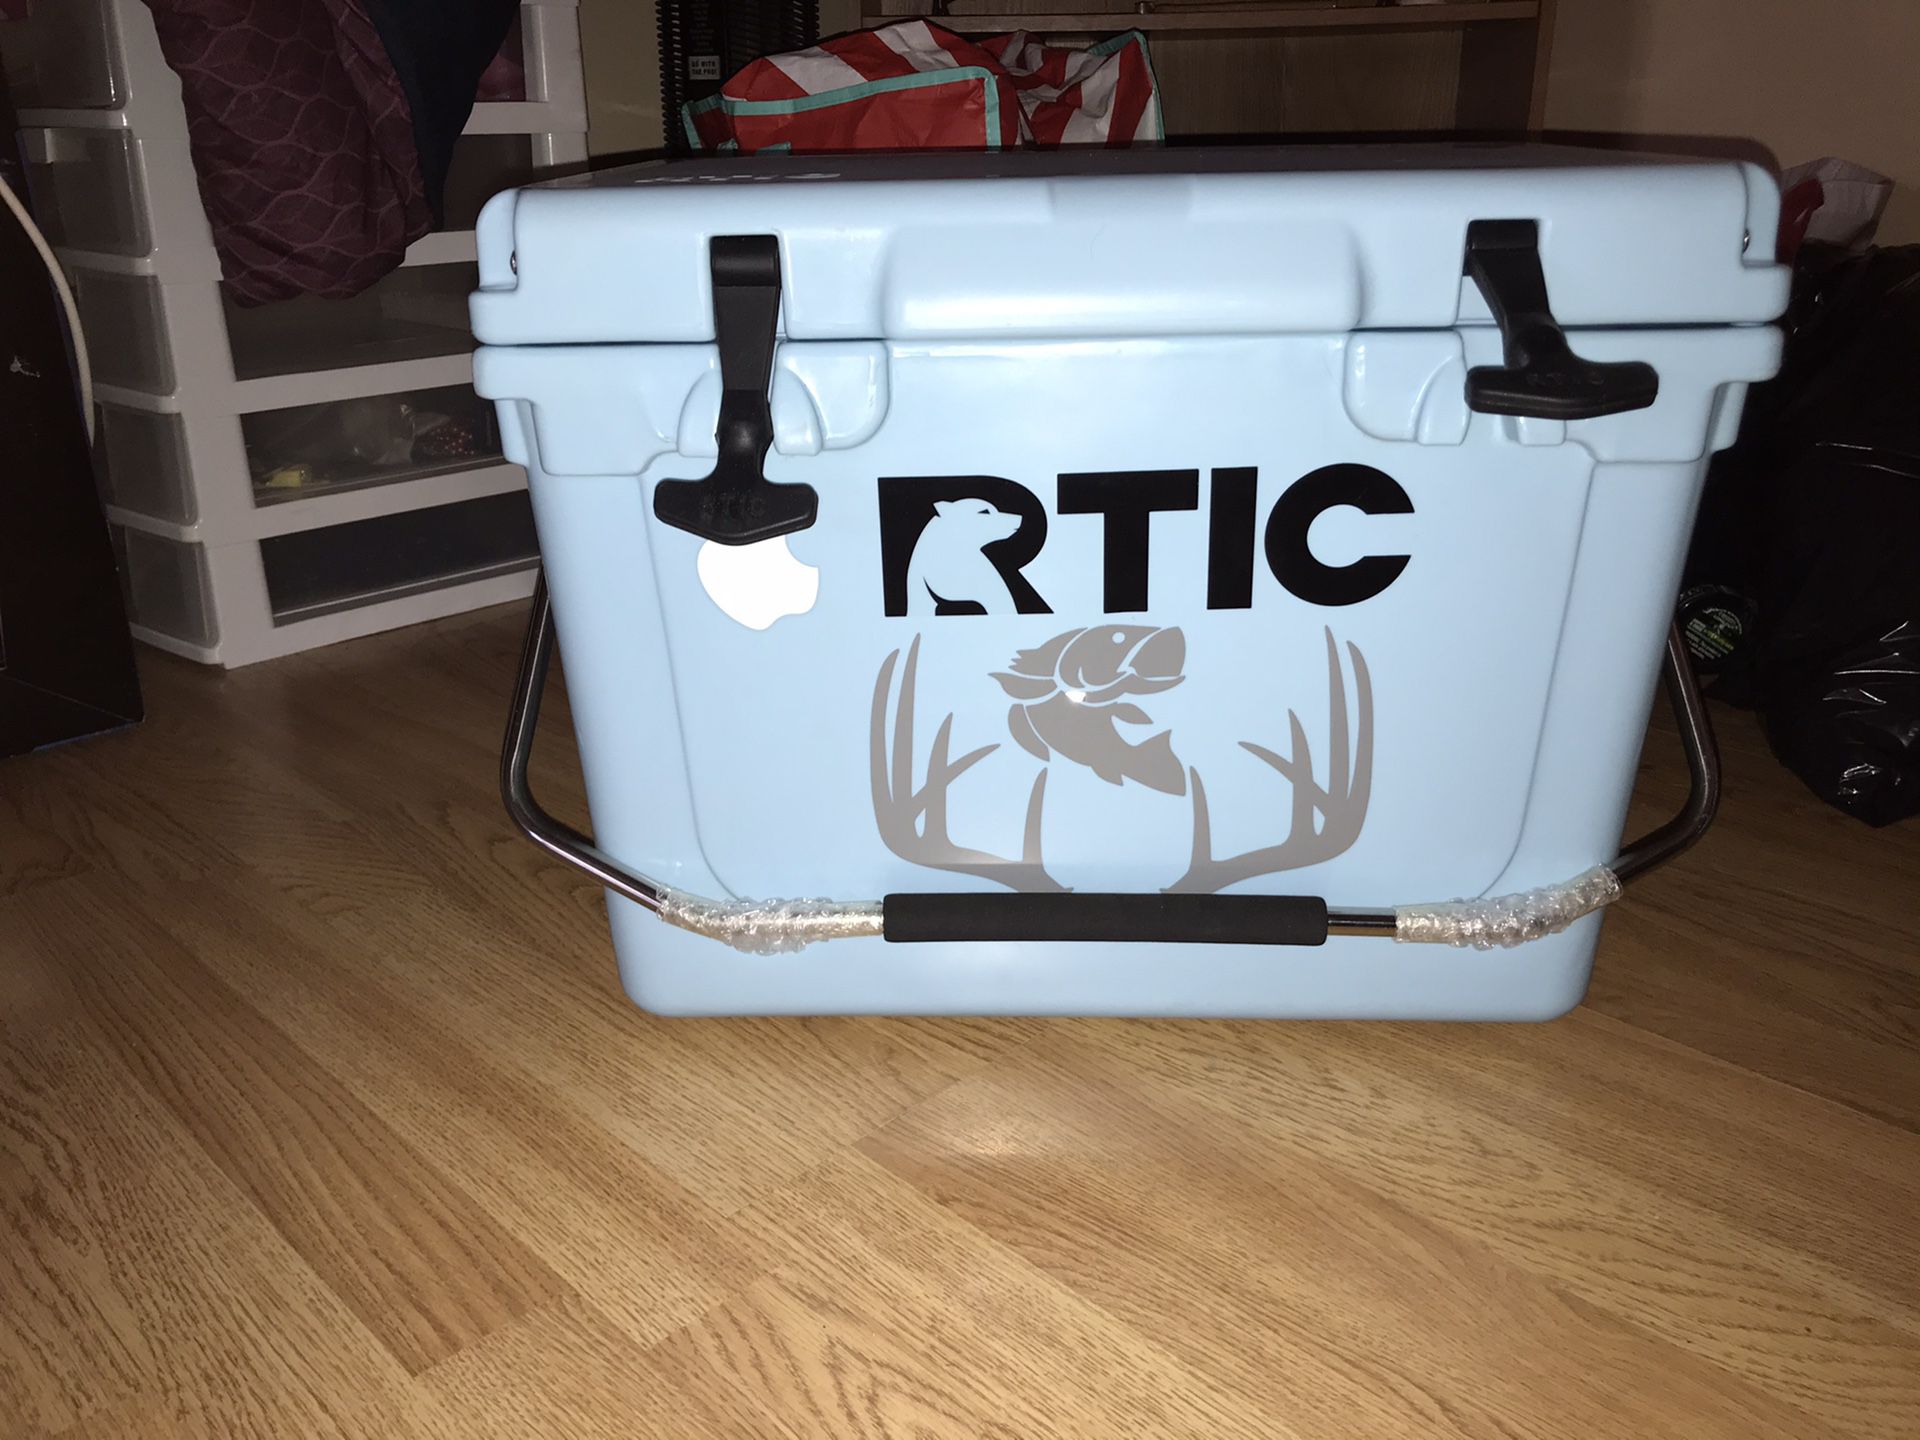 Brand new RTIC cooler with decal on it